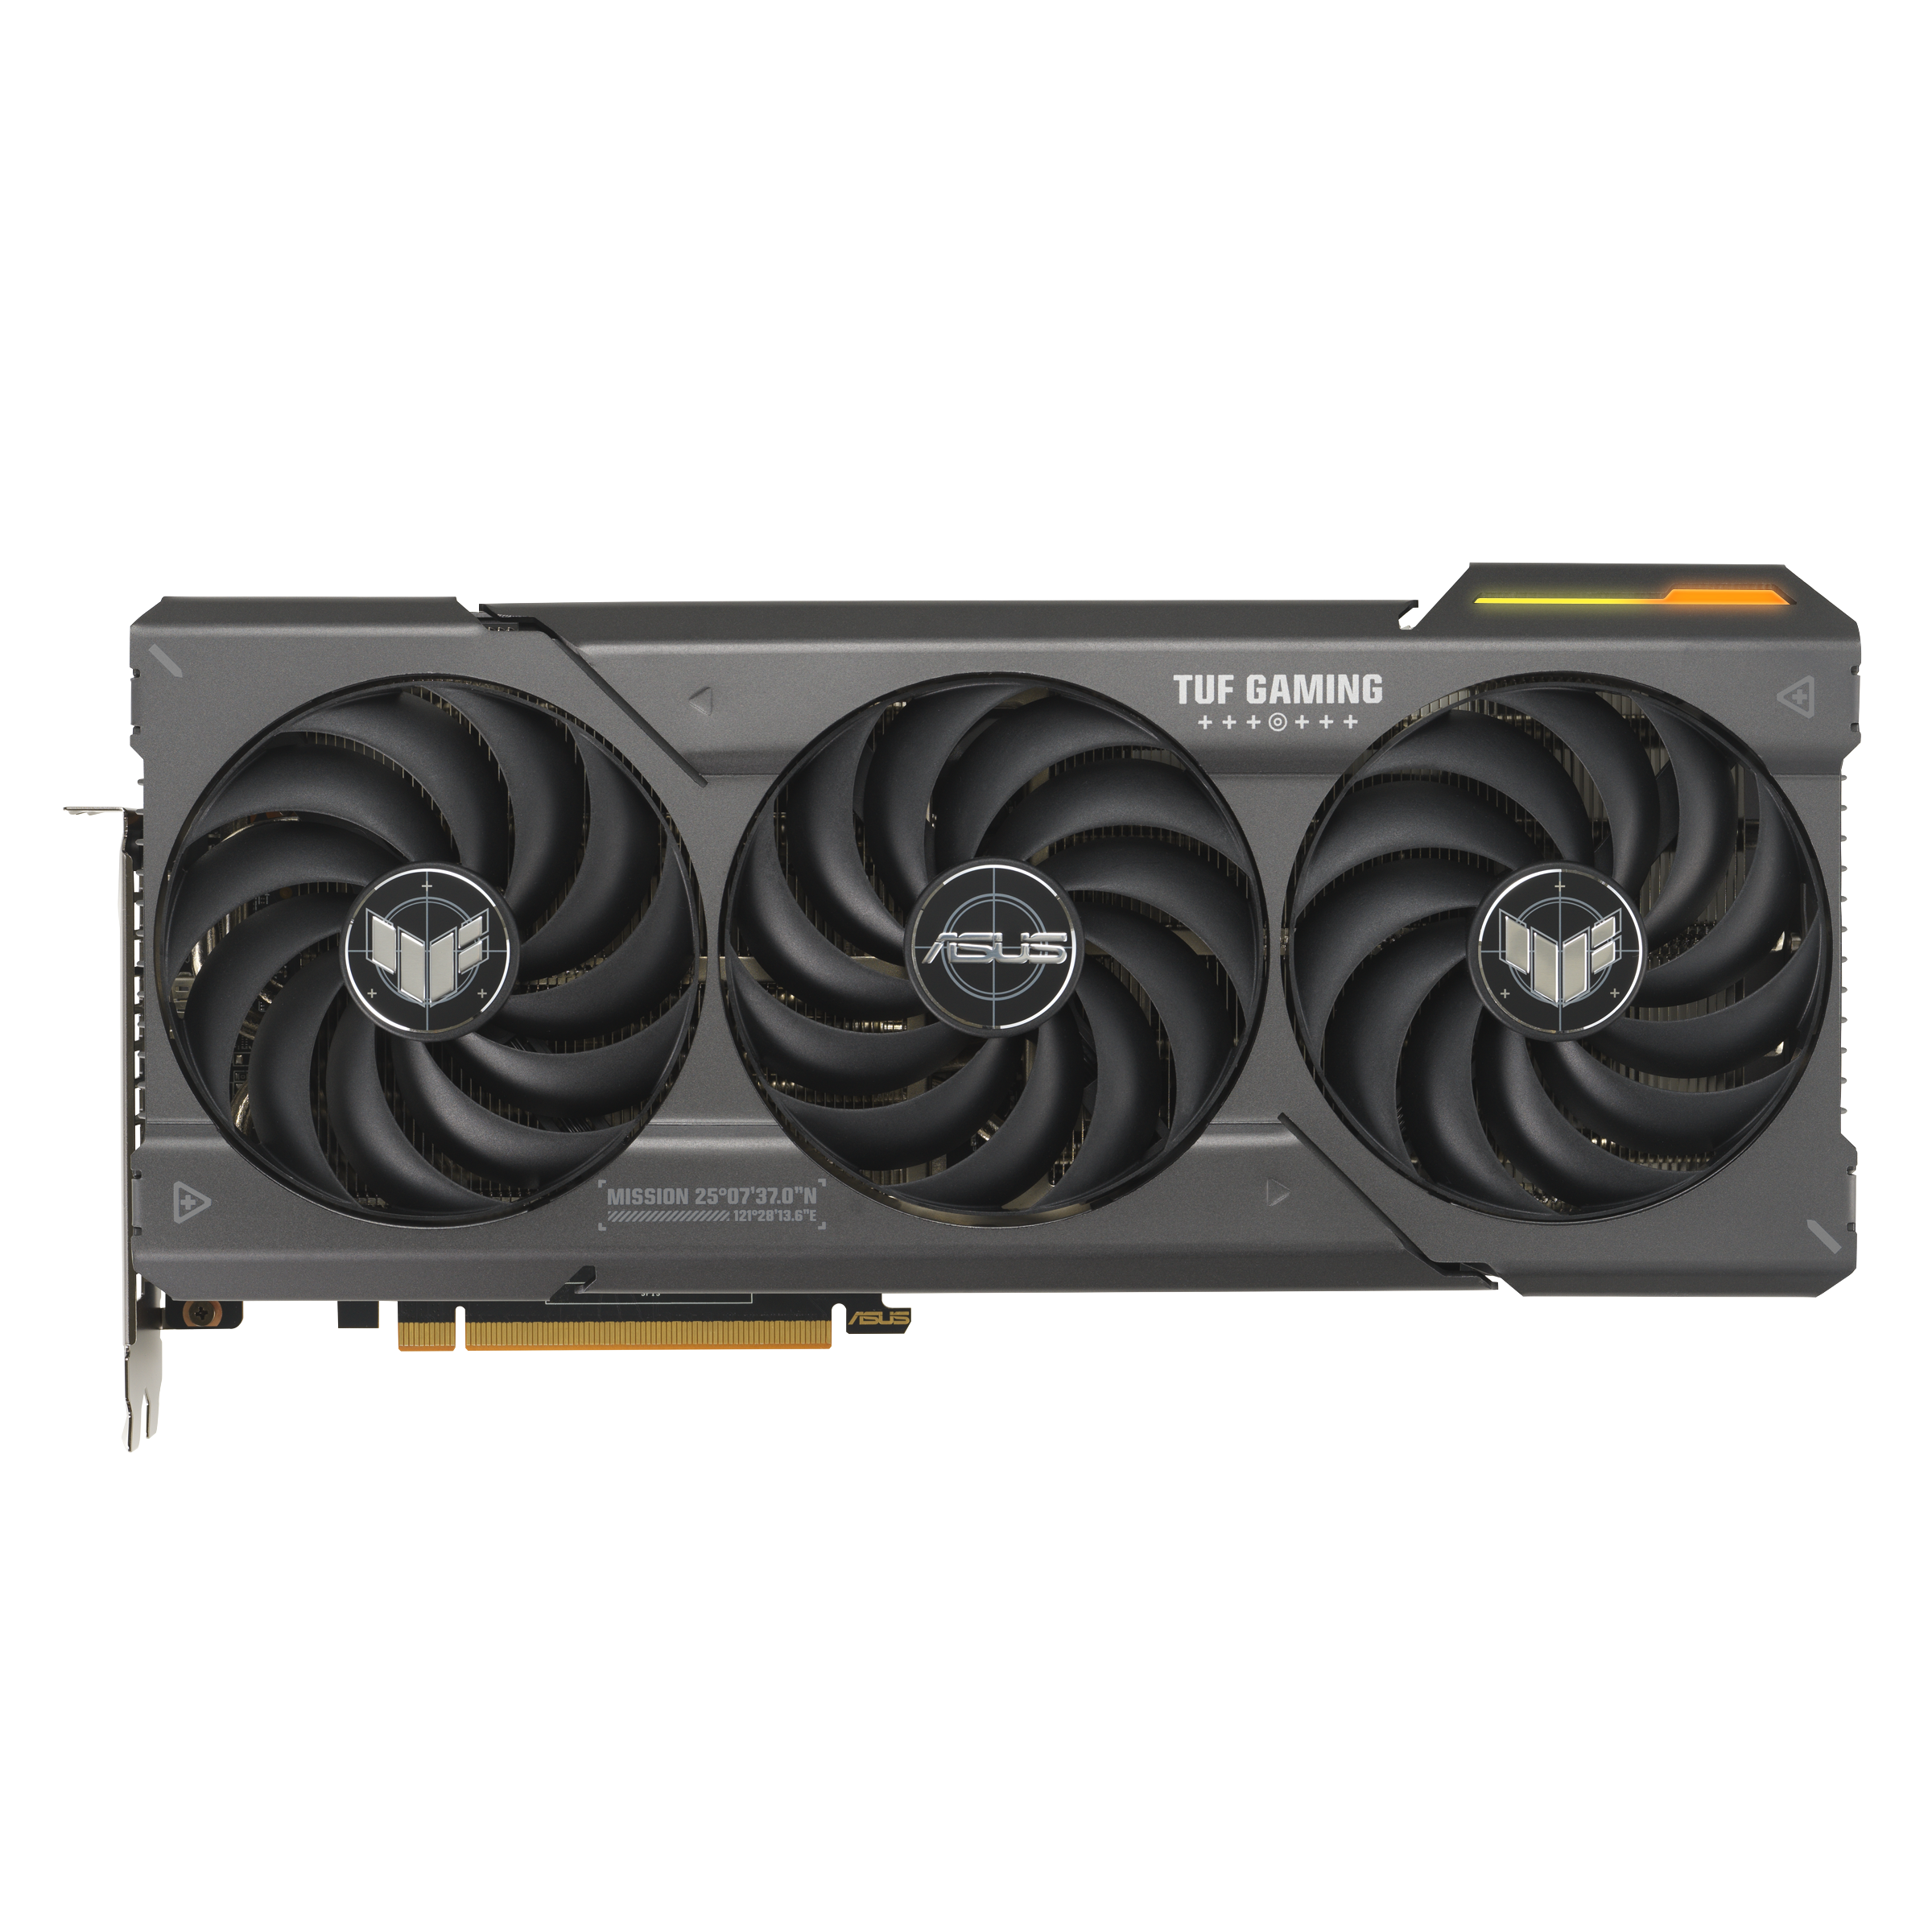 Where to buy AMD Radeon RX 6800XT: find stock here